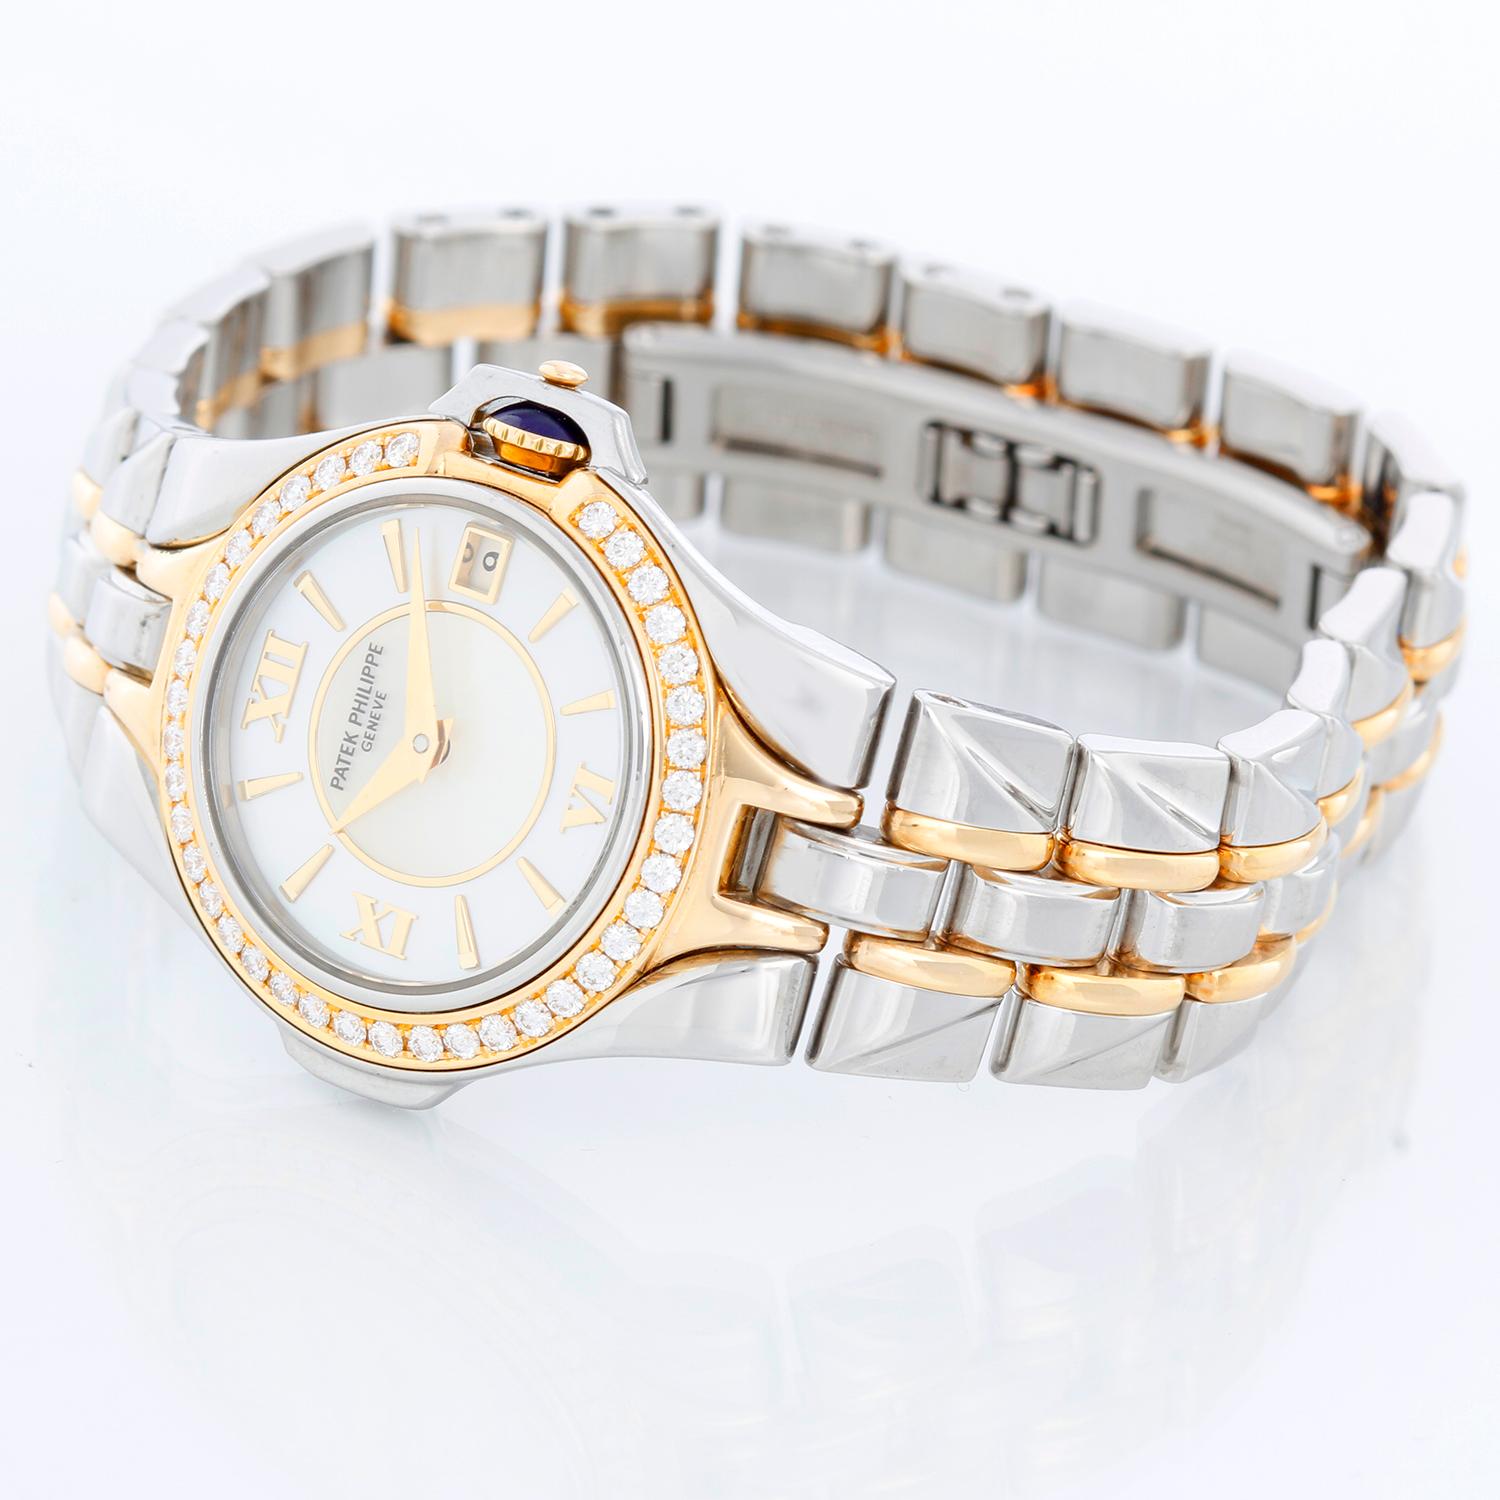 Patek Philippe Ladies Stainless Steel Watch Ladies 4891/1 - Quartz. Stainless steel case & yellow gold with diamond bezel ( 26 mm ) . Mother of Pearl dial with polished hour markers and Roman numerals. Two tone Patek Philippe bracelet with deployant